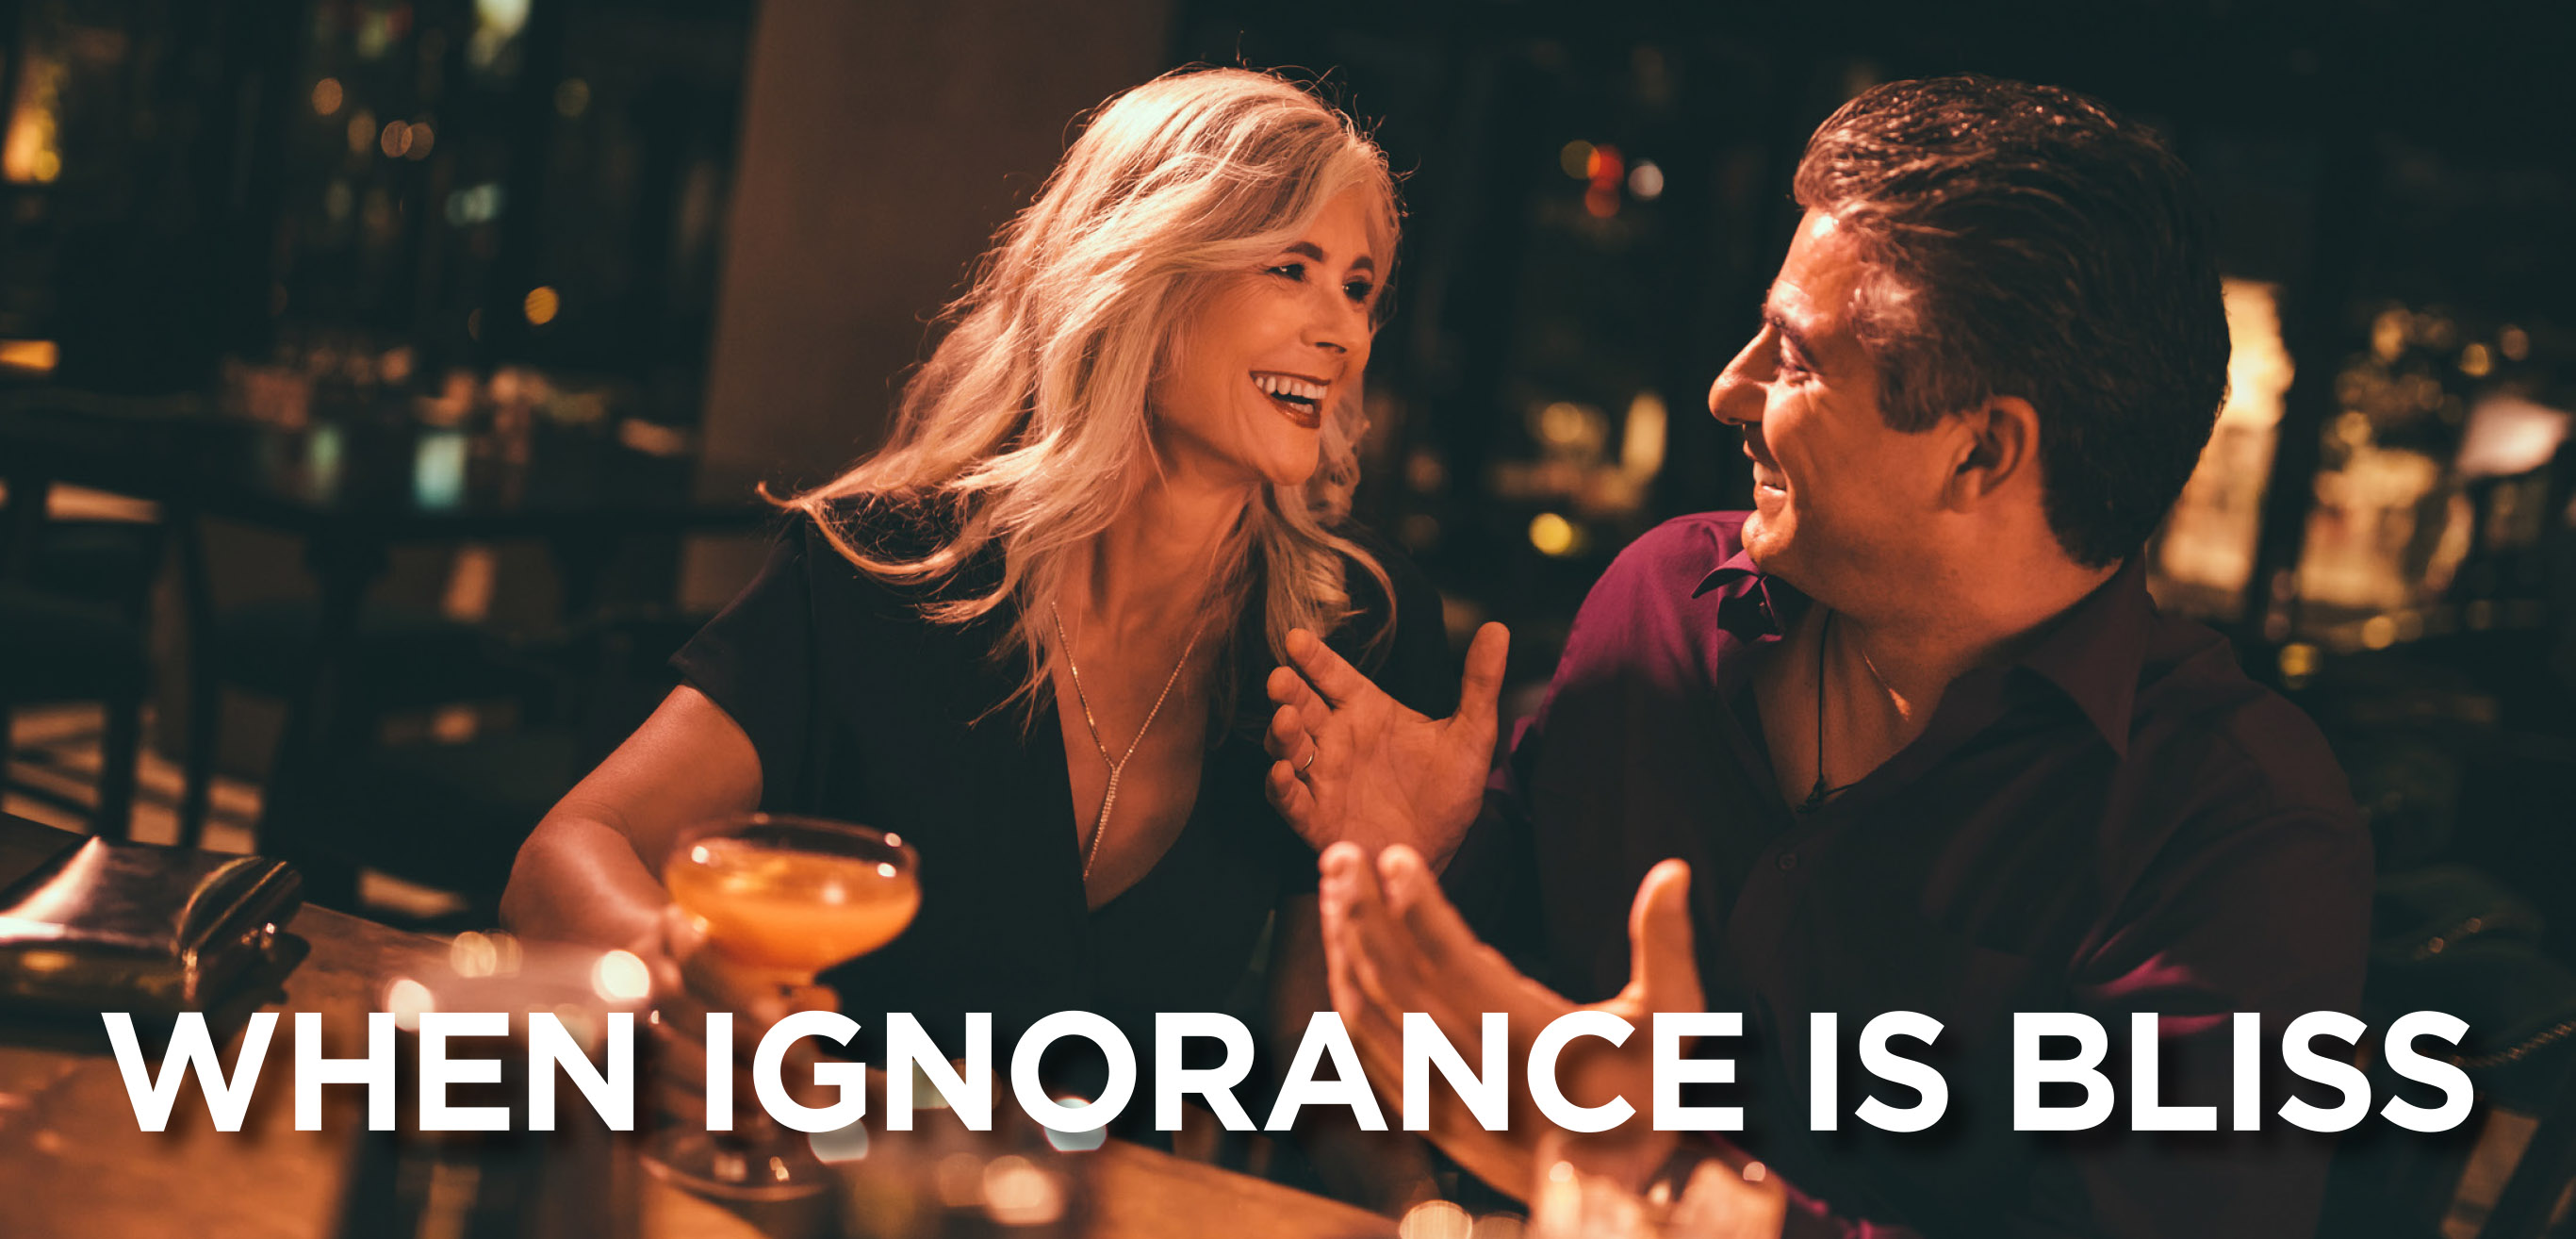 You are currently viewing When Ignorance Is Bliss